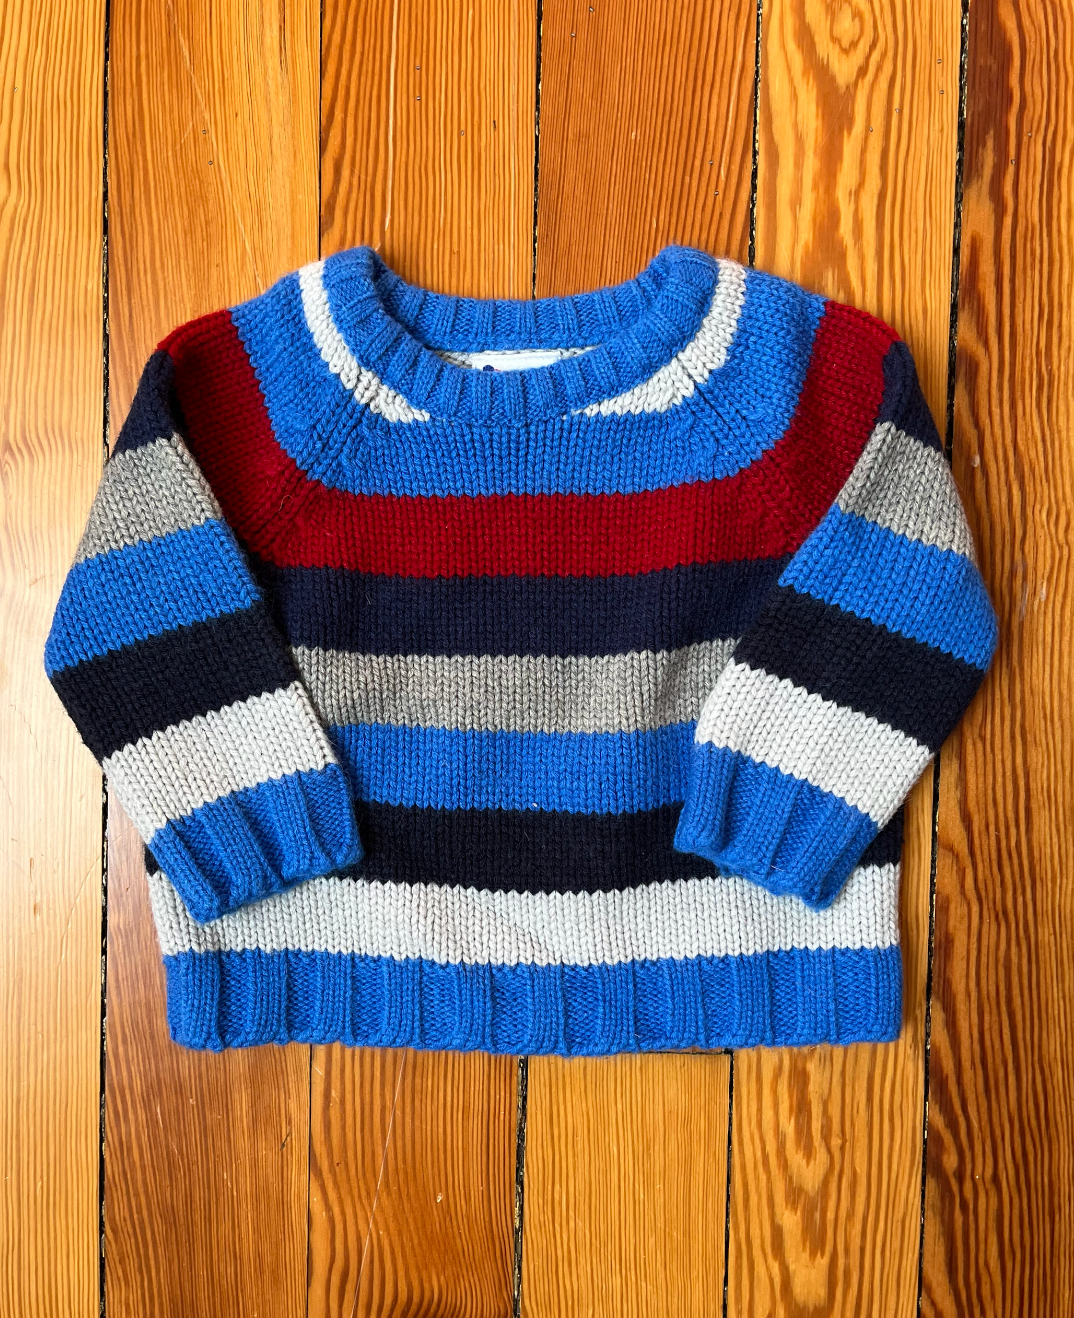 Gumballs Vintage Striped Sweater - 12M - Royal Blue, Navy, Red, White, Gray - EUC